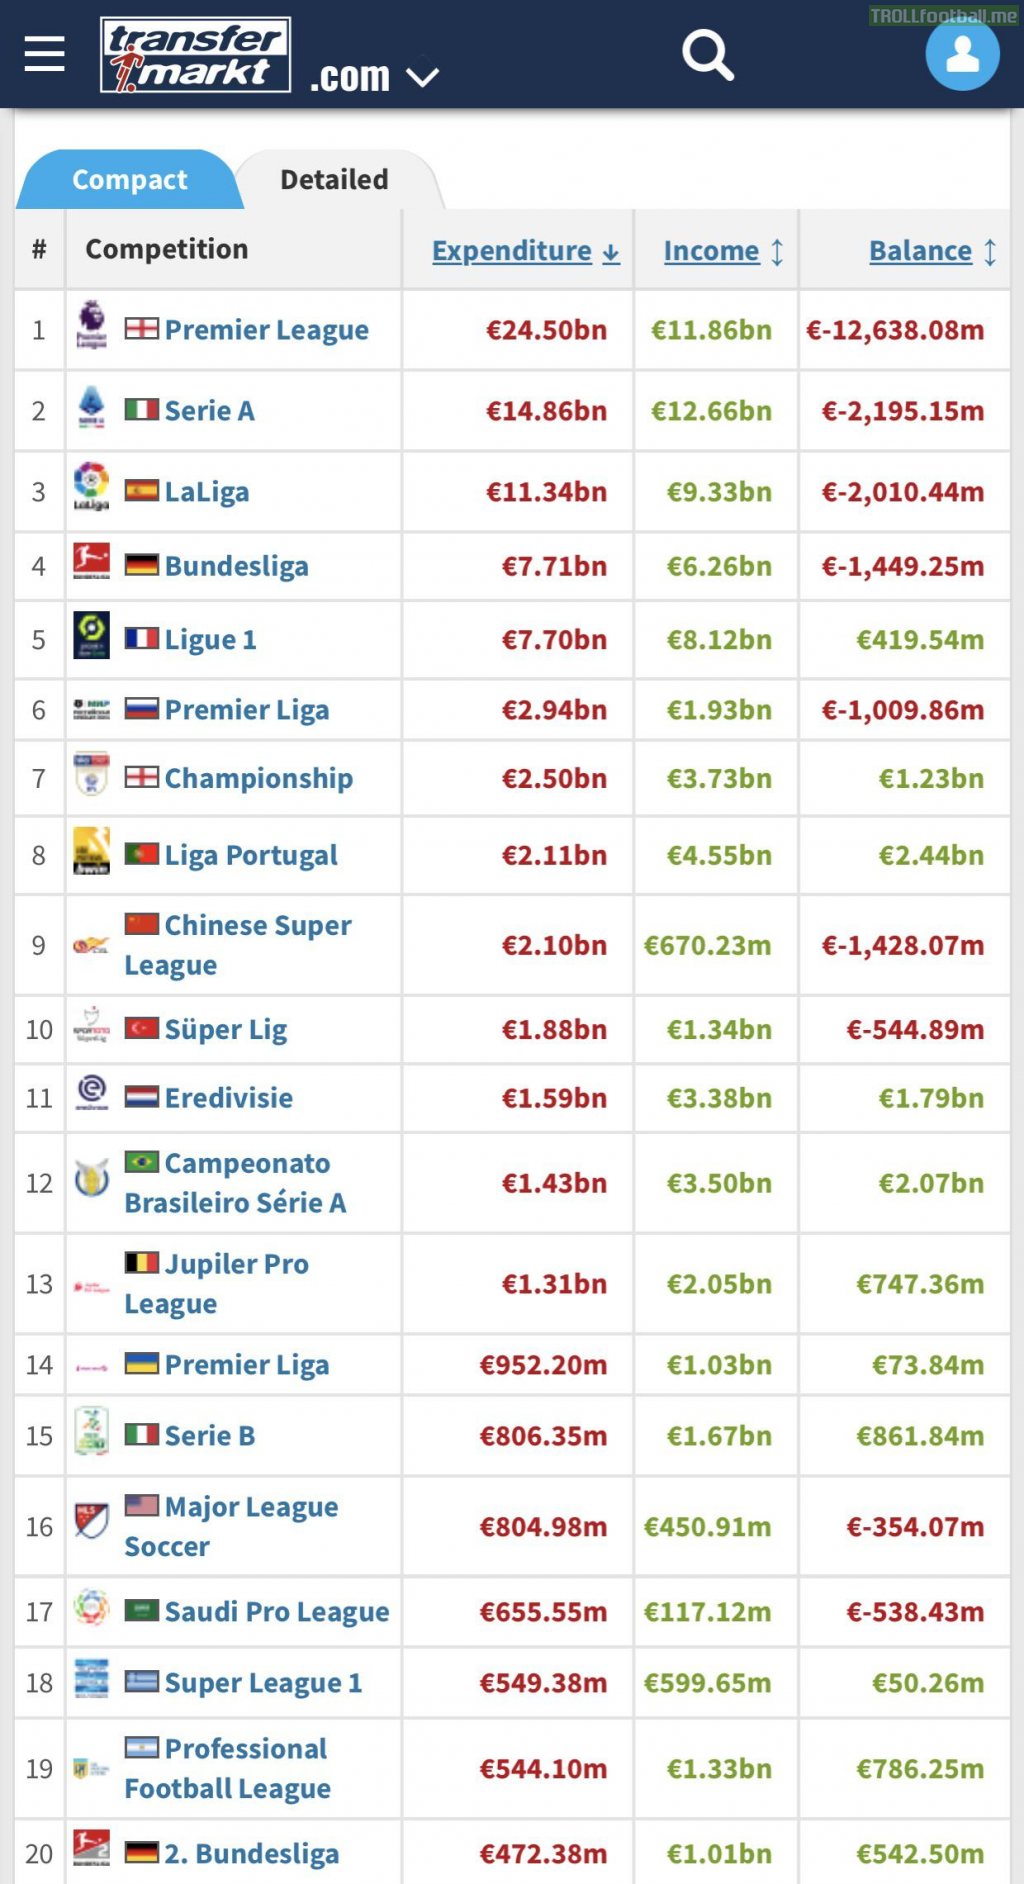 [Transfermarkt] - Transfer balance (expenditure/income) by league since 00/01 season.